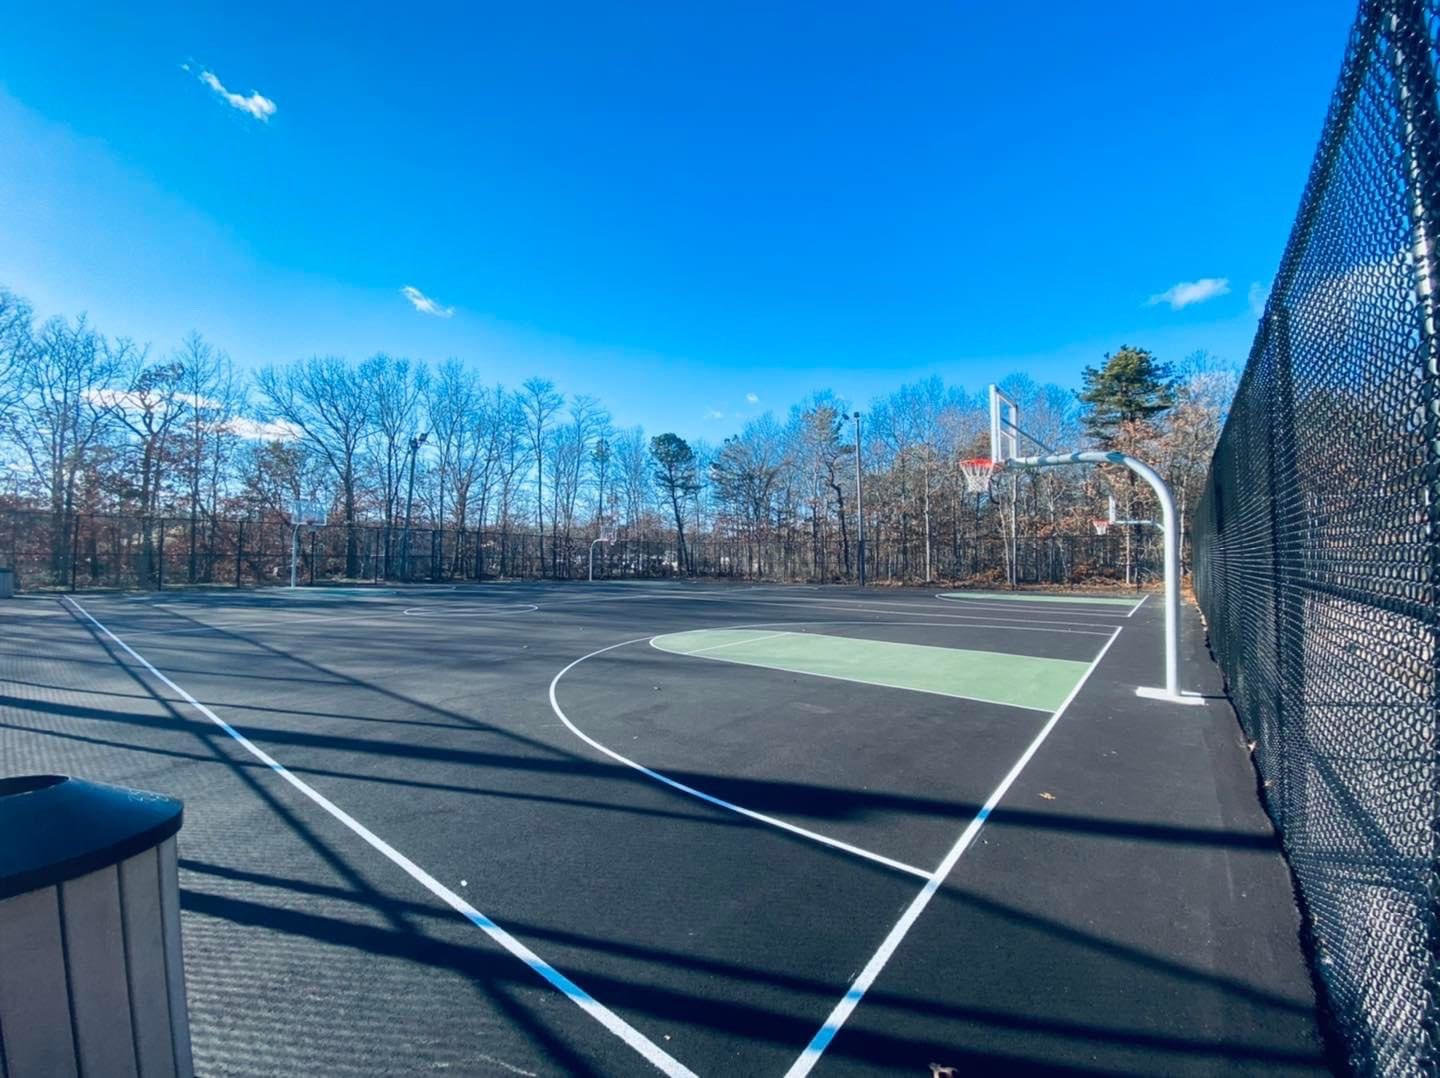 Brookhaven Town councilman Dan Panico posted this photo of the refurbished court on his Facebook page.